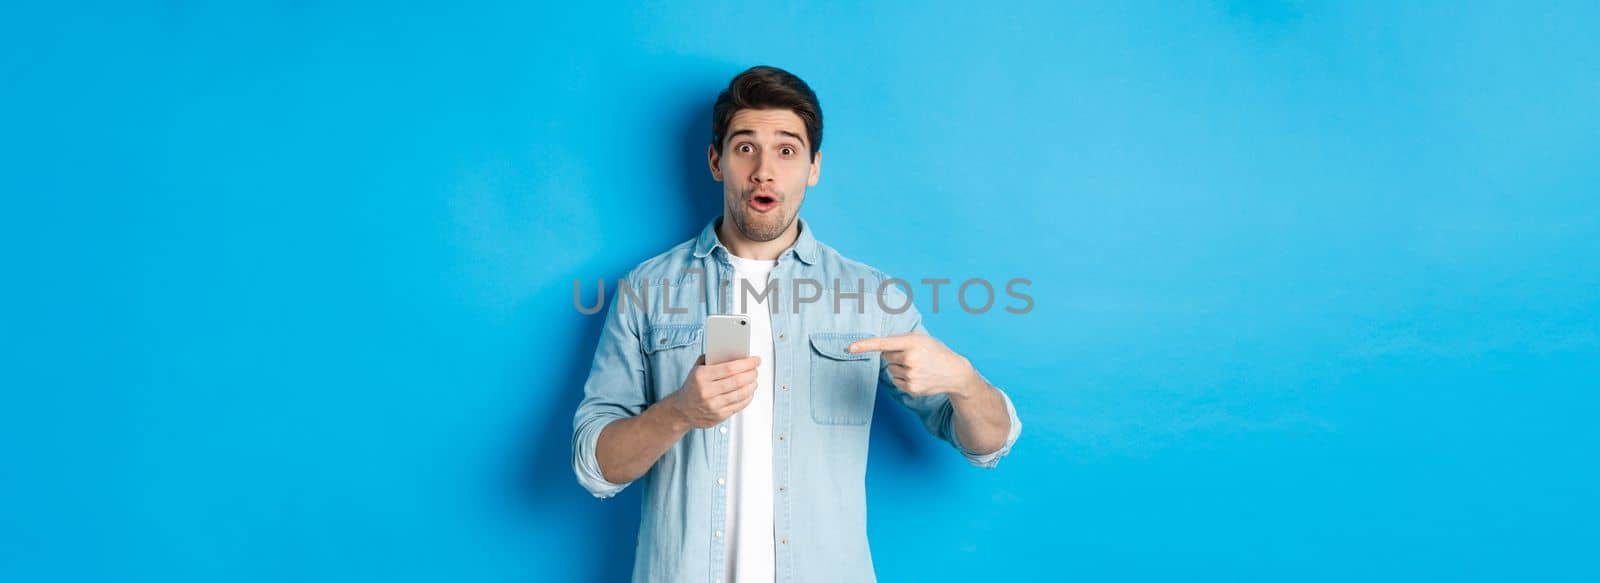 Concept of online shopping, applications and technology. Impressed man pointing finger at mobile phone and looking amazed, recommending app, standing over blue background.